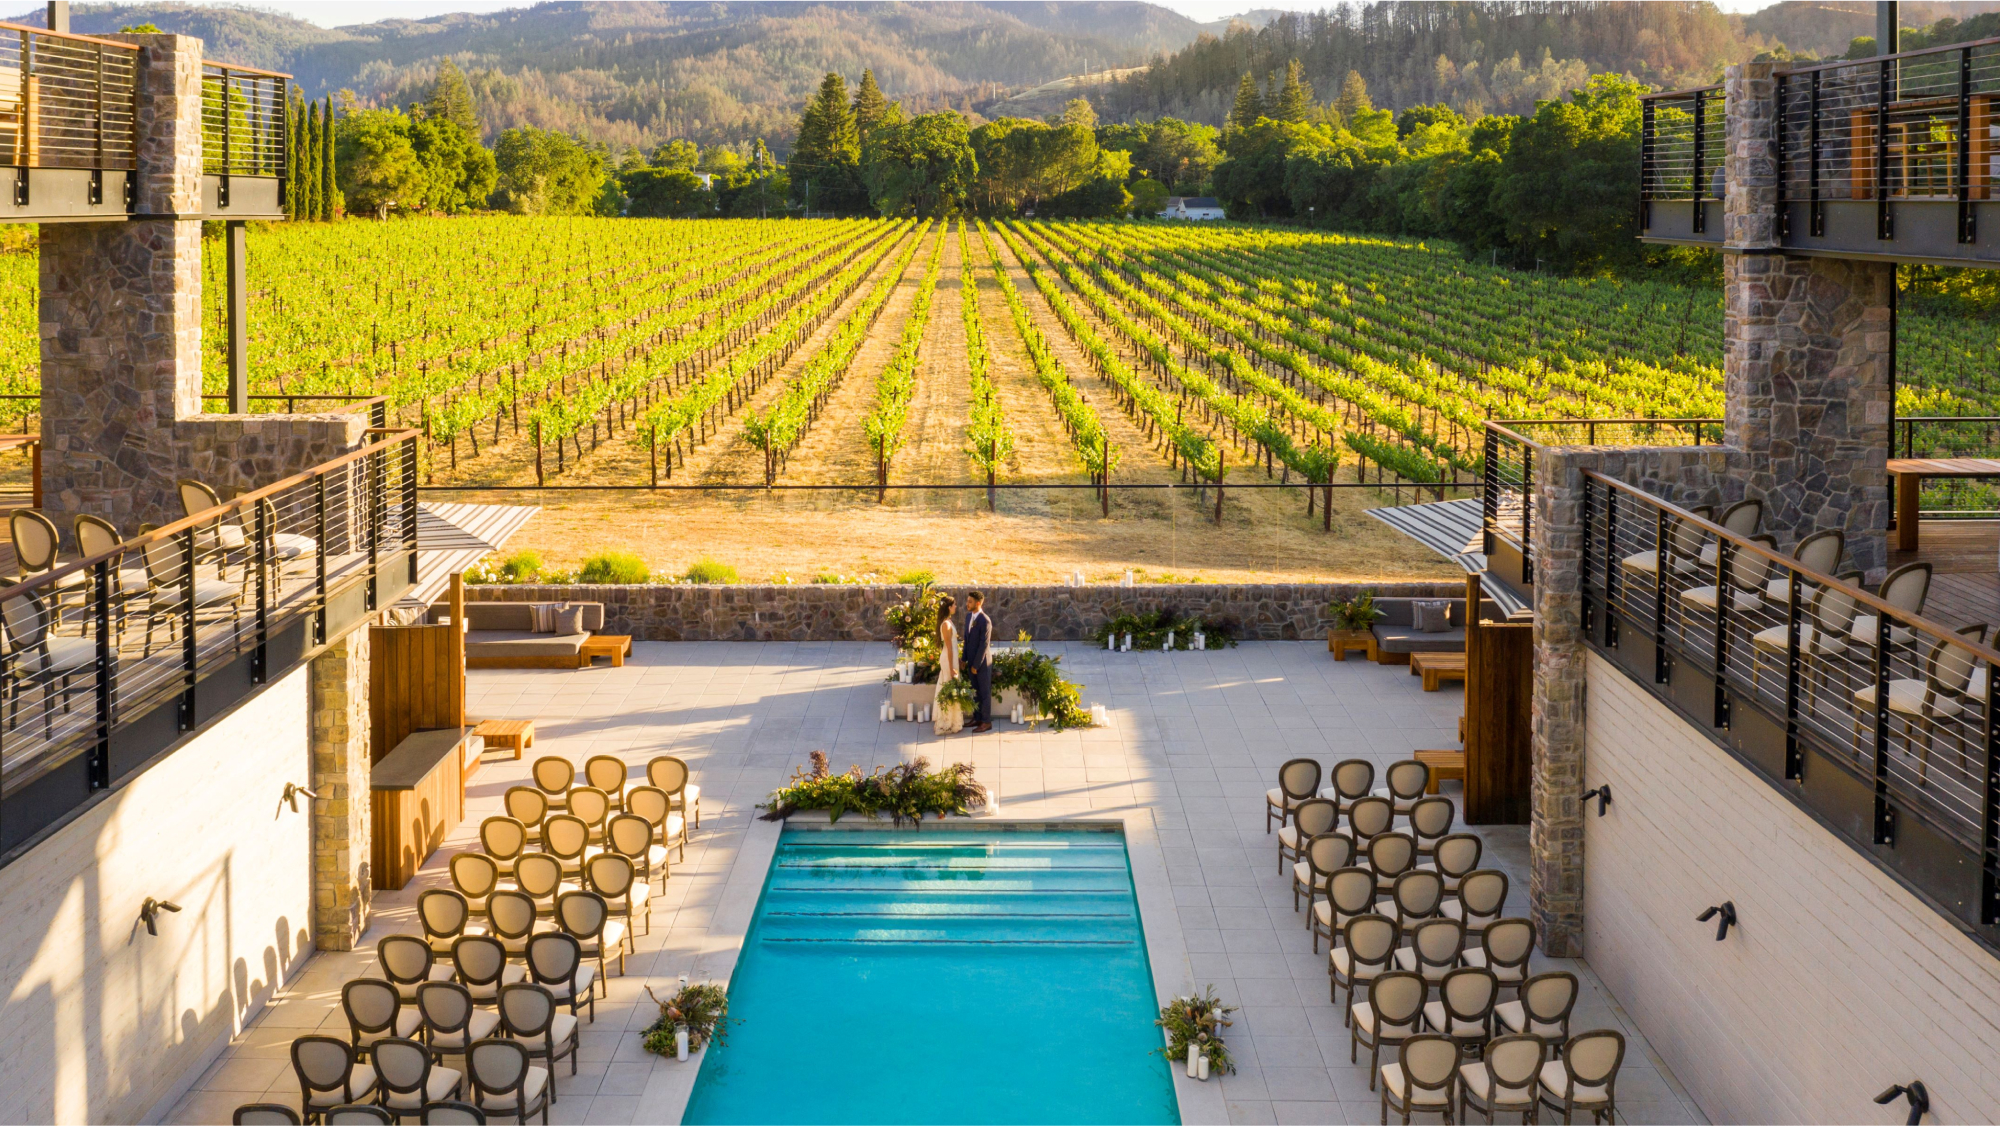 event set up by the pool with vineyard views